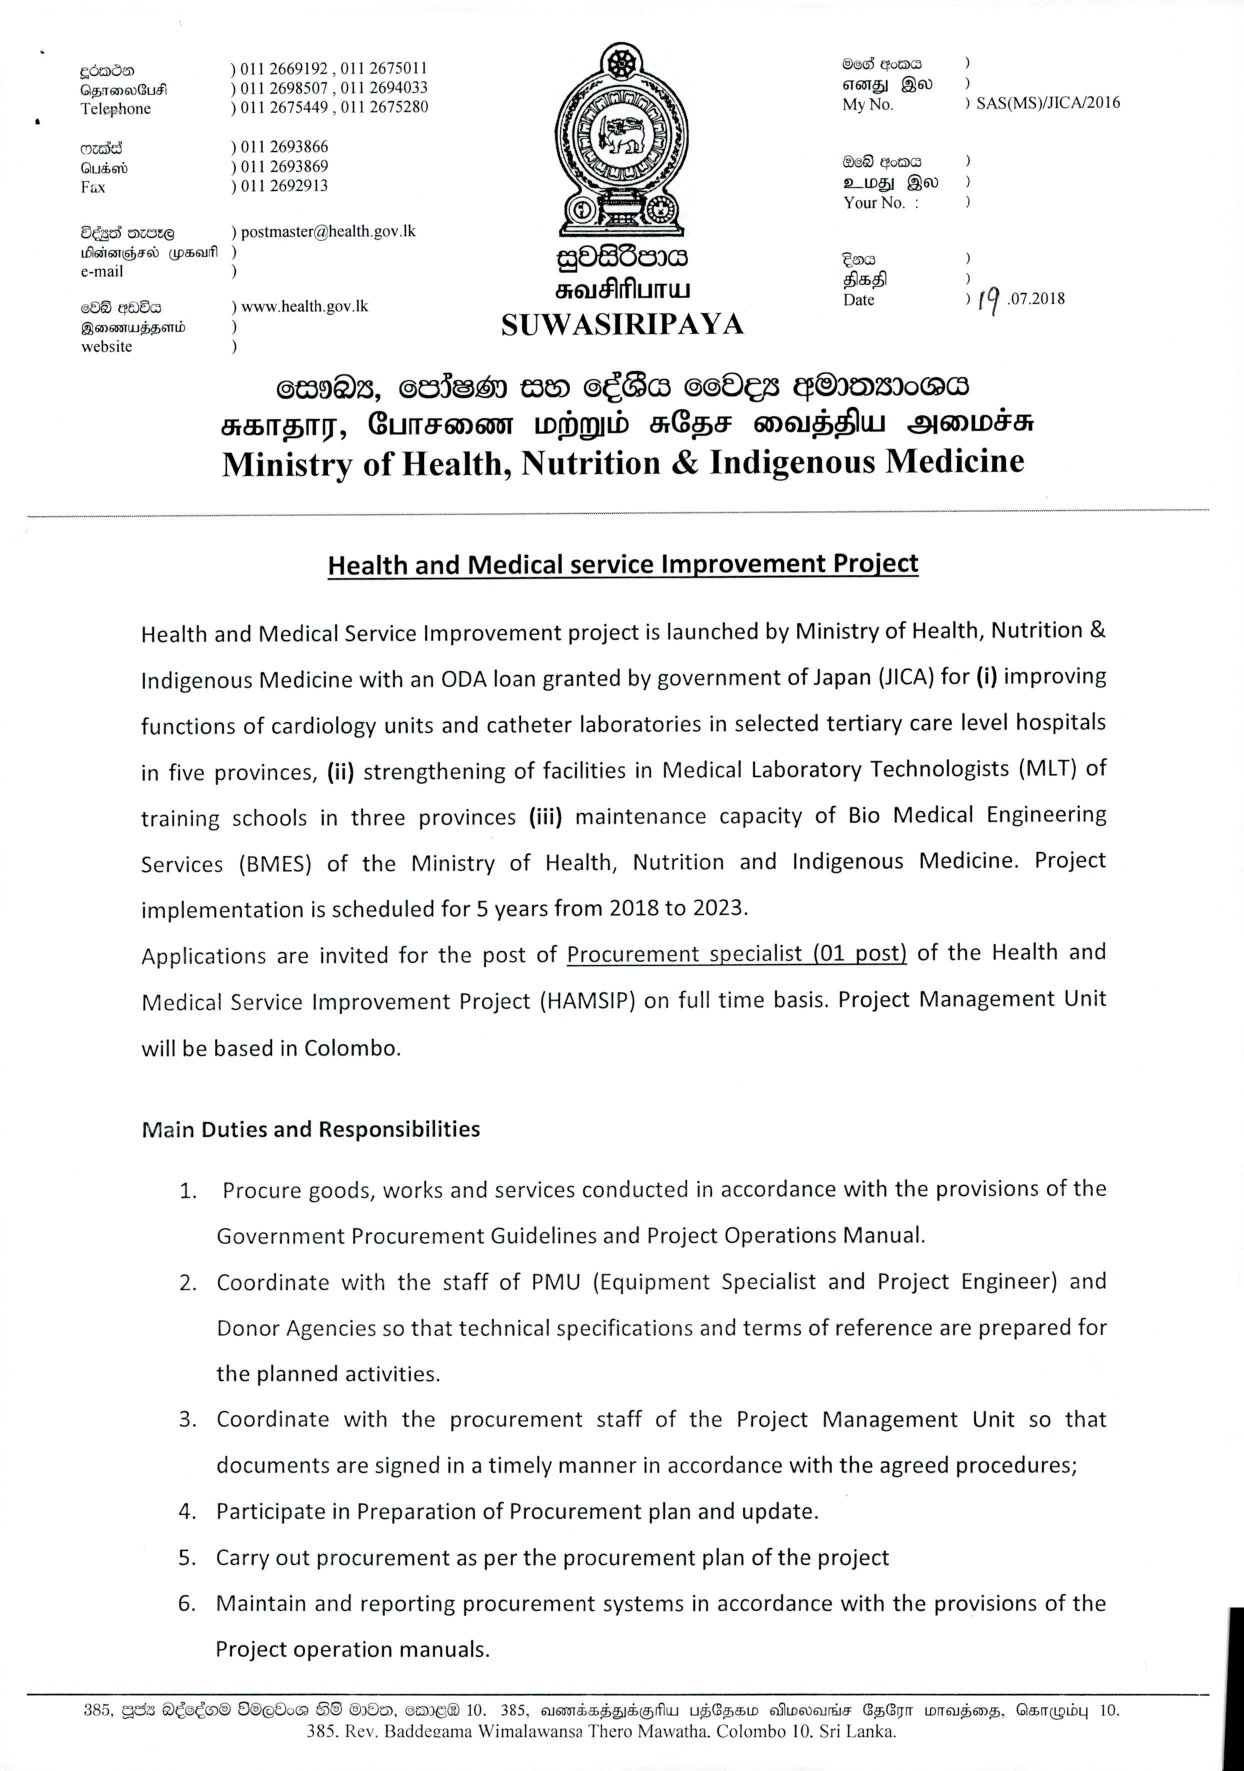 Procurement Specialist - Ministry of Health Nutrition and Indigenous medicine Jobs Vacancies